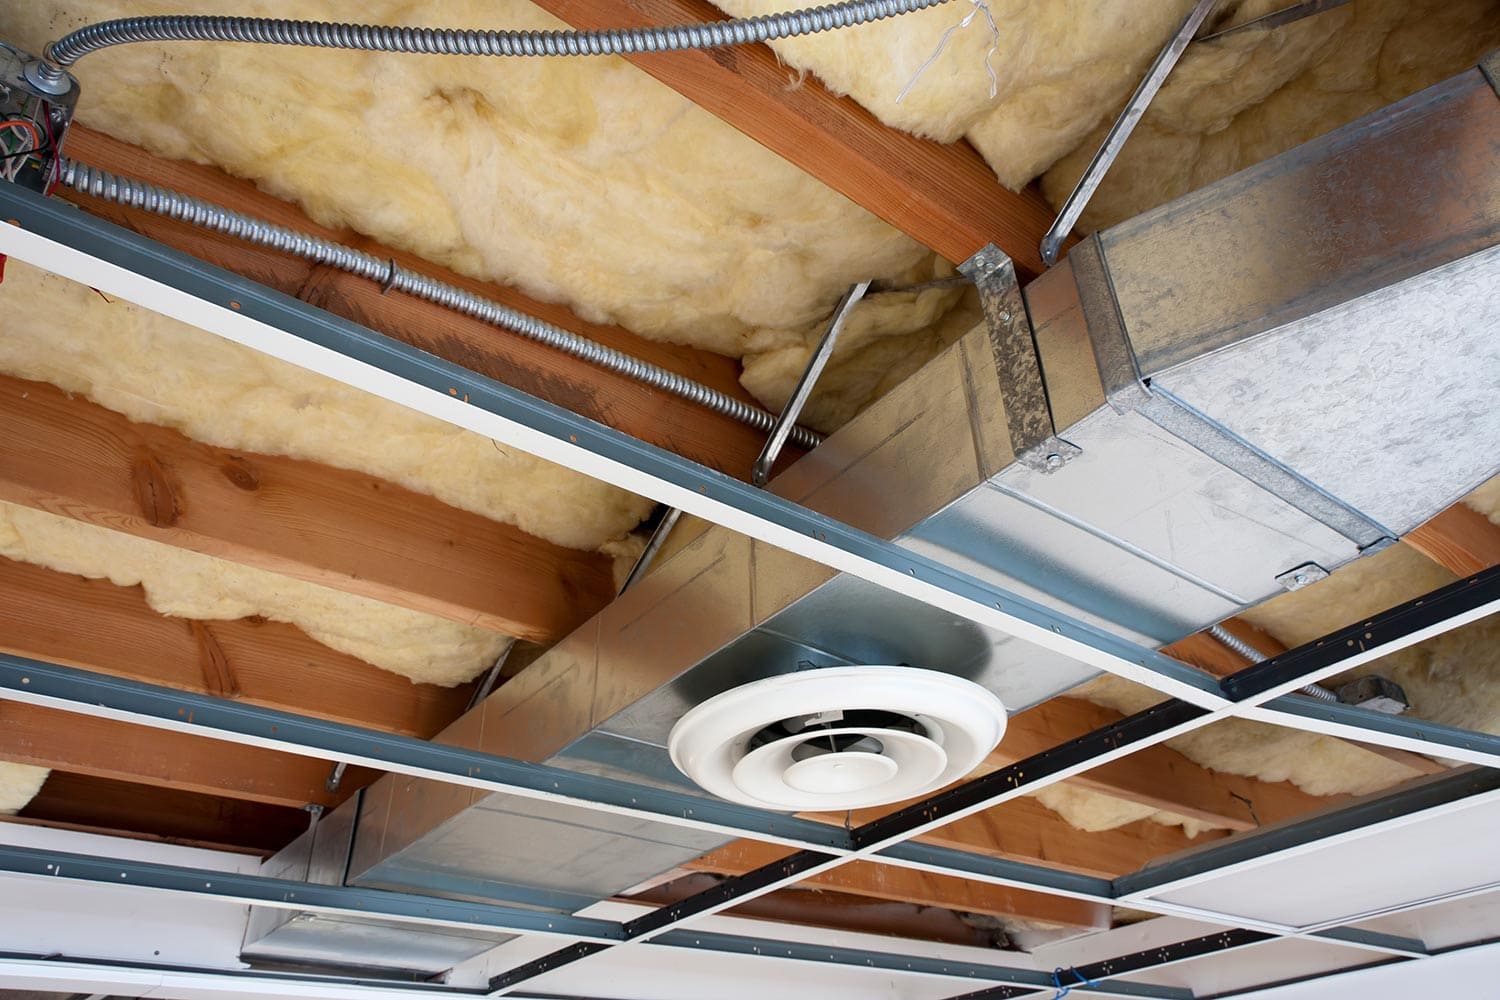 Heating ductwork in office space being remodeled